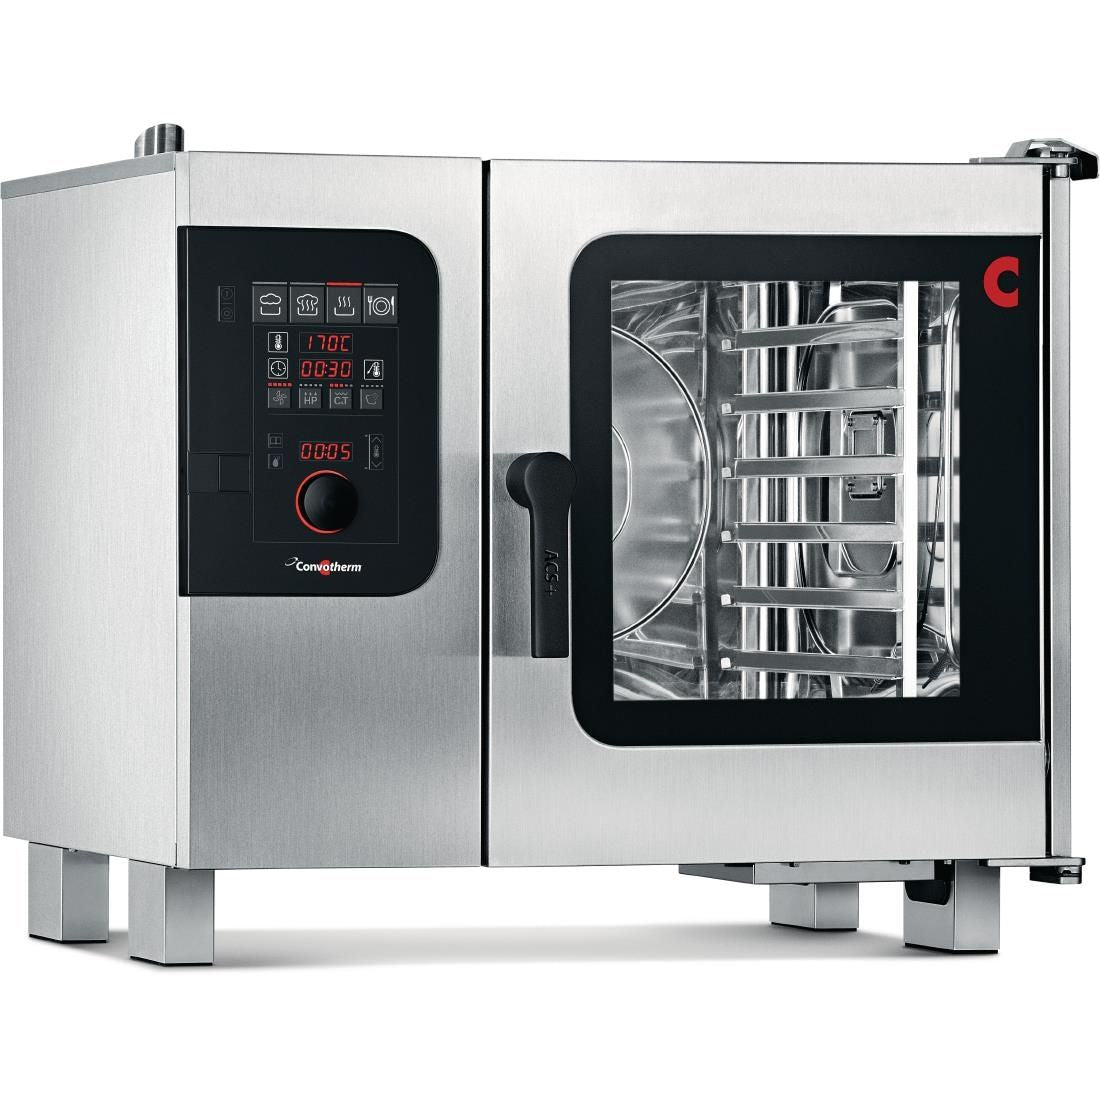 HC261-MO Convotherm 4 easyDial Combi Oven 6 x 1 x1 GN Grid with ConvoGrill JD Catering Equipment Solutions Ltd